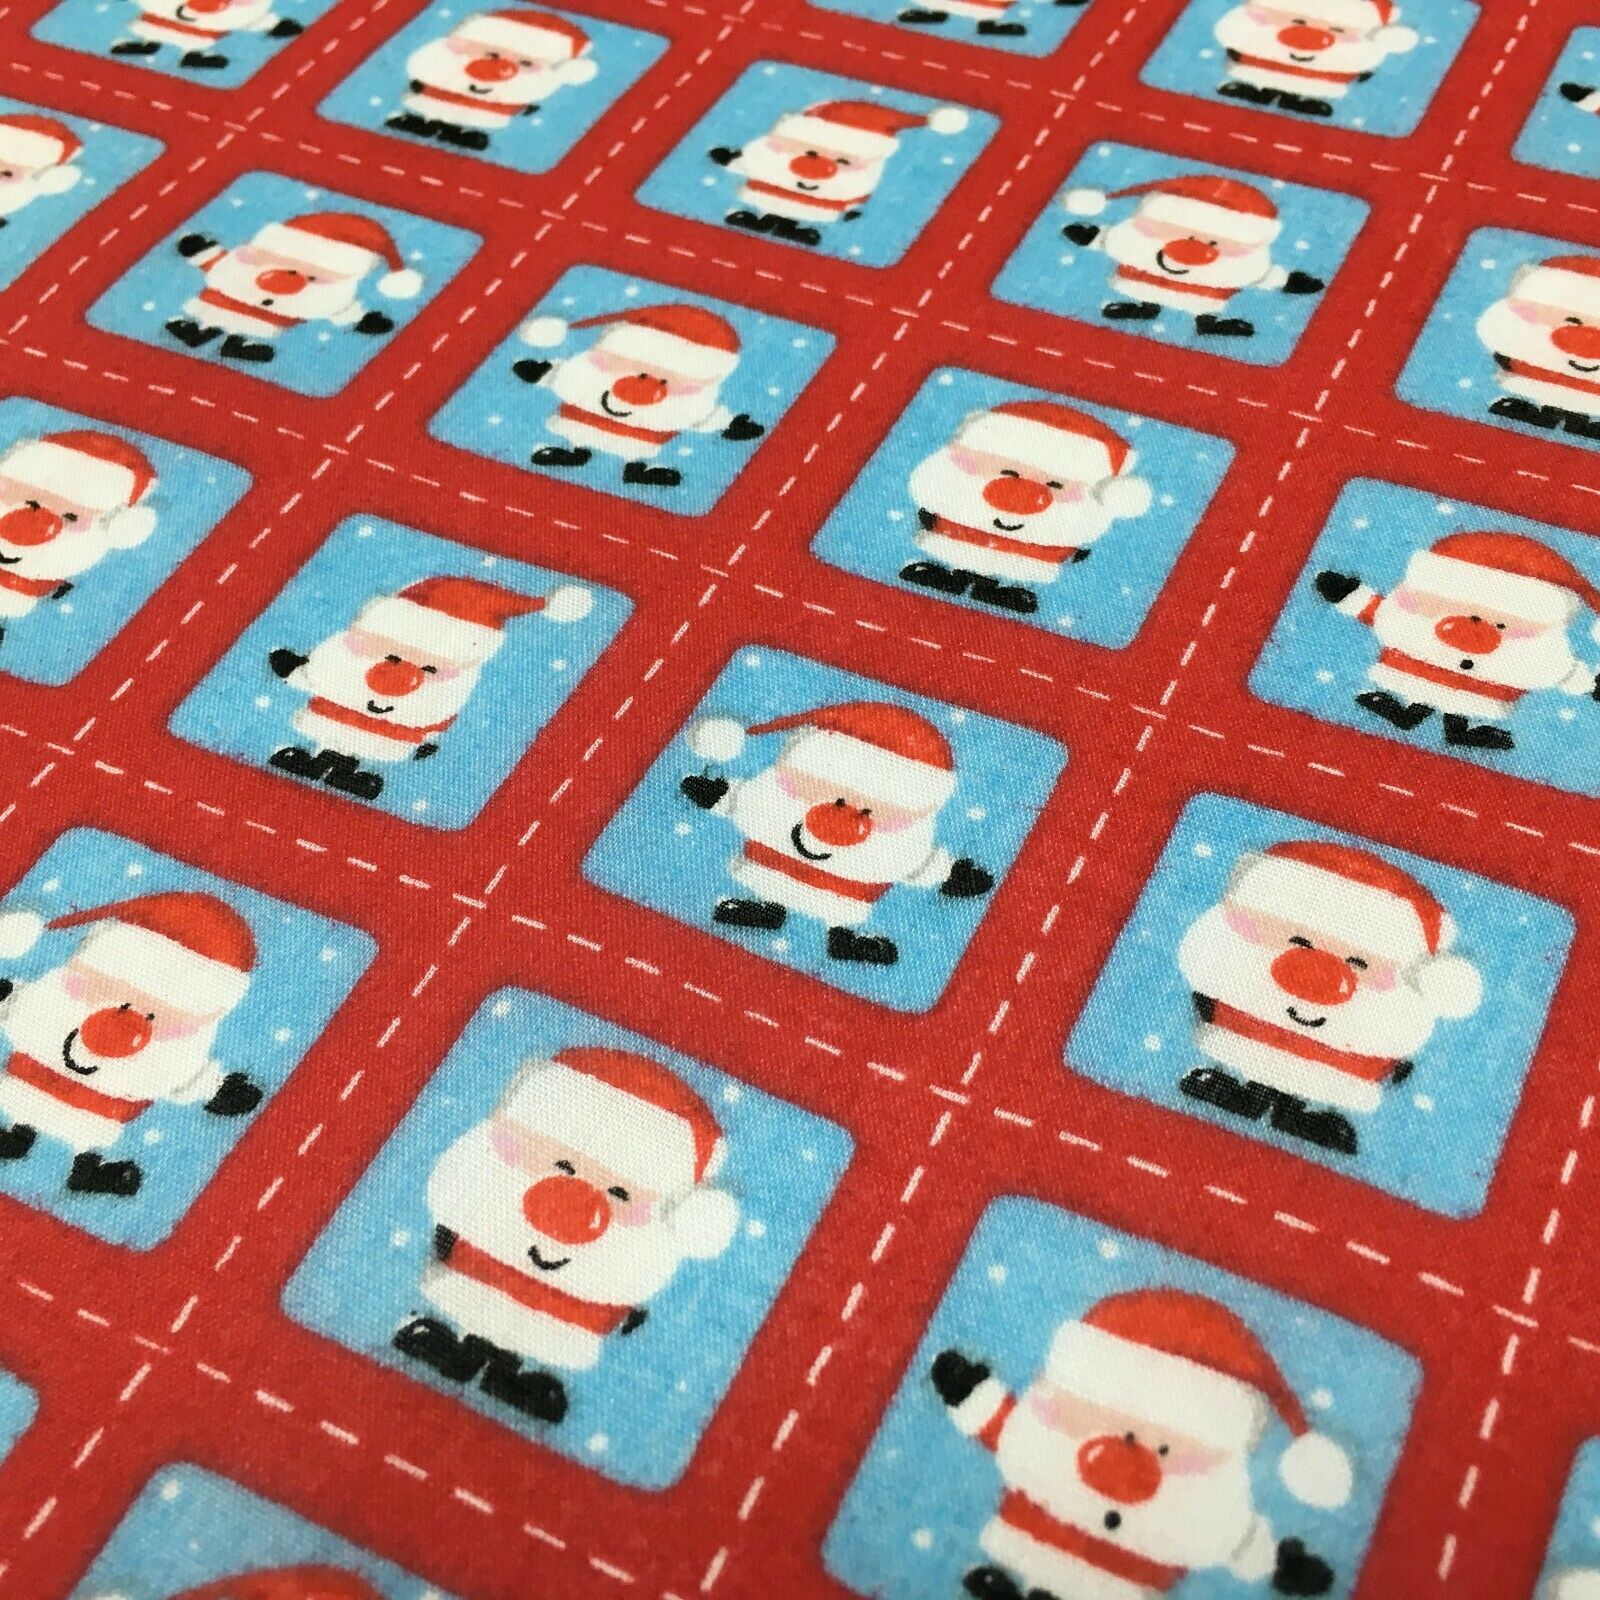 Father Christmas Stamp Printed Polycotton Fabric 110 cm MD1284 Mtex